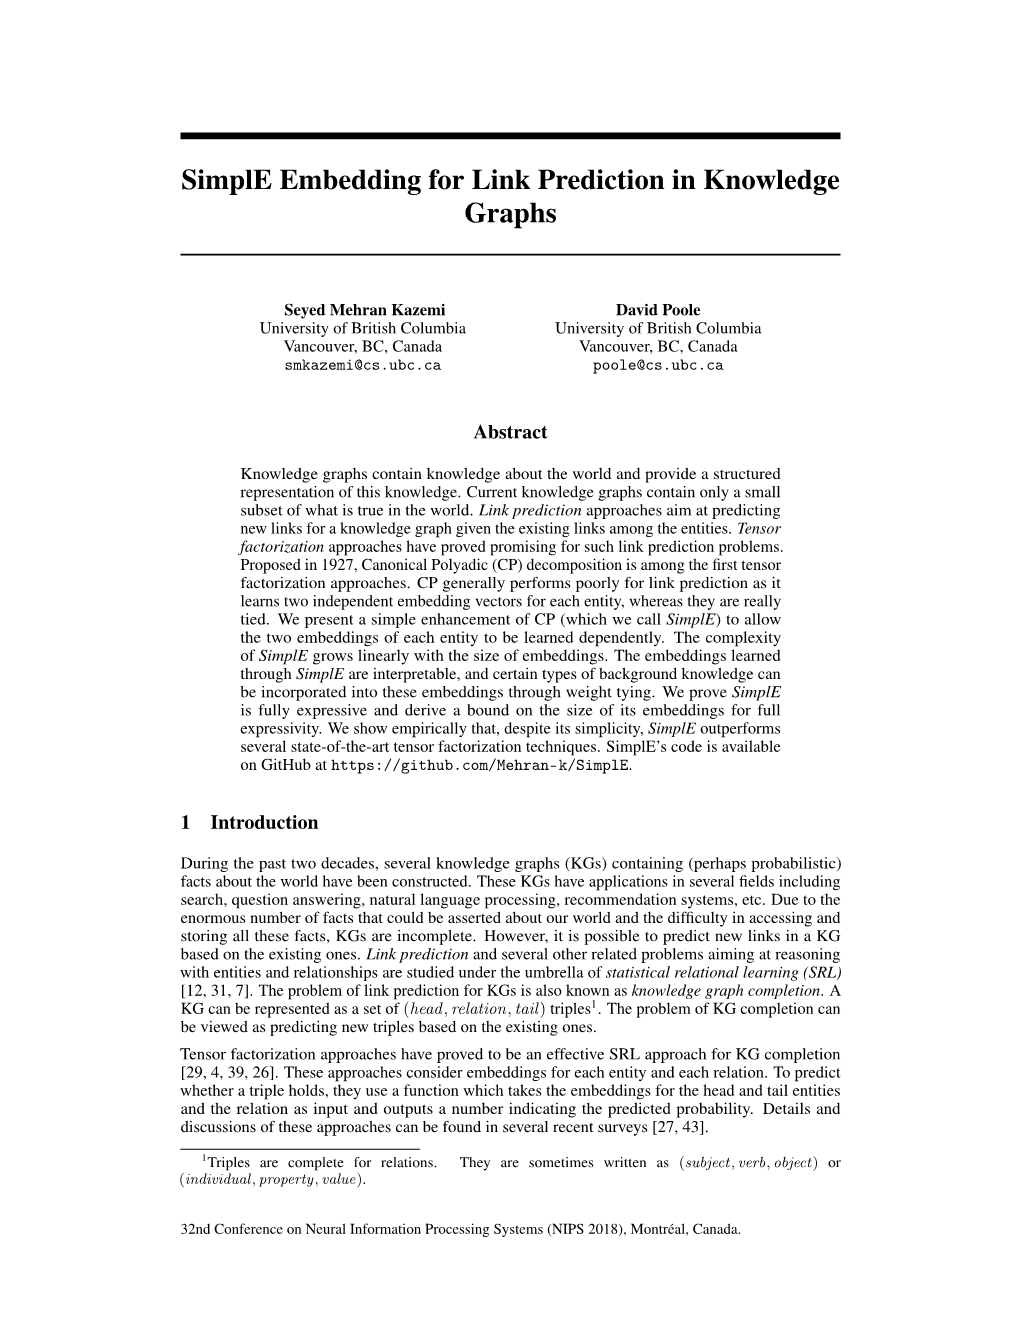 Simple Embedding for Link Prediction in Knowledge Graphs